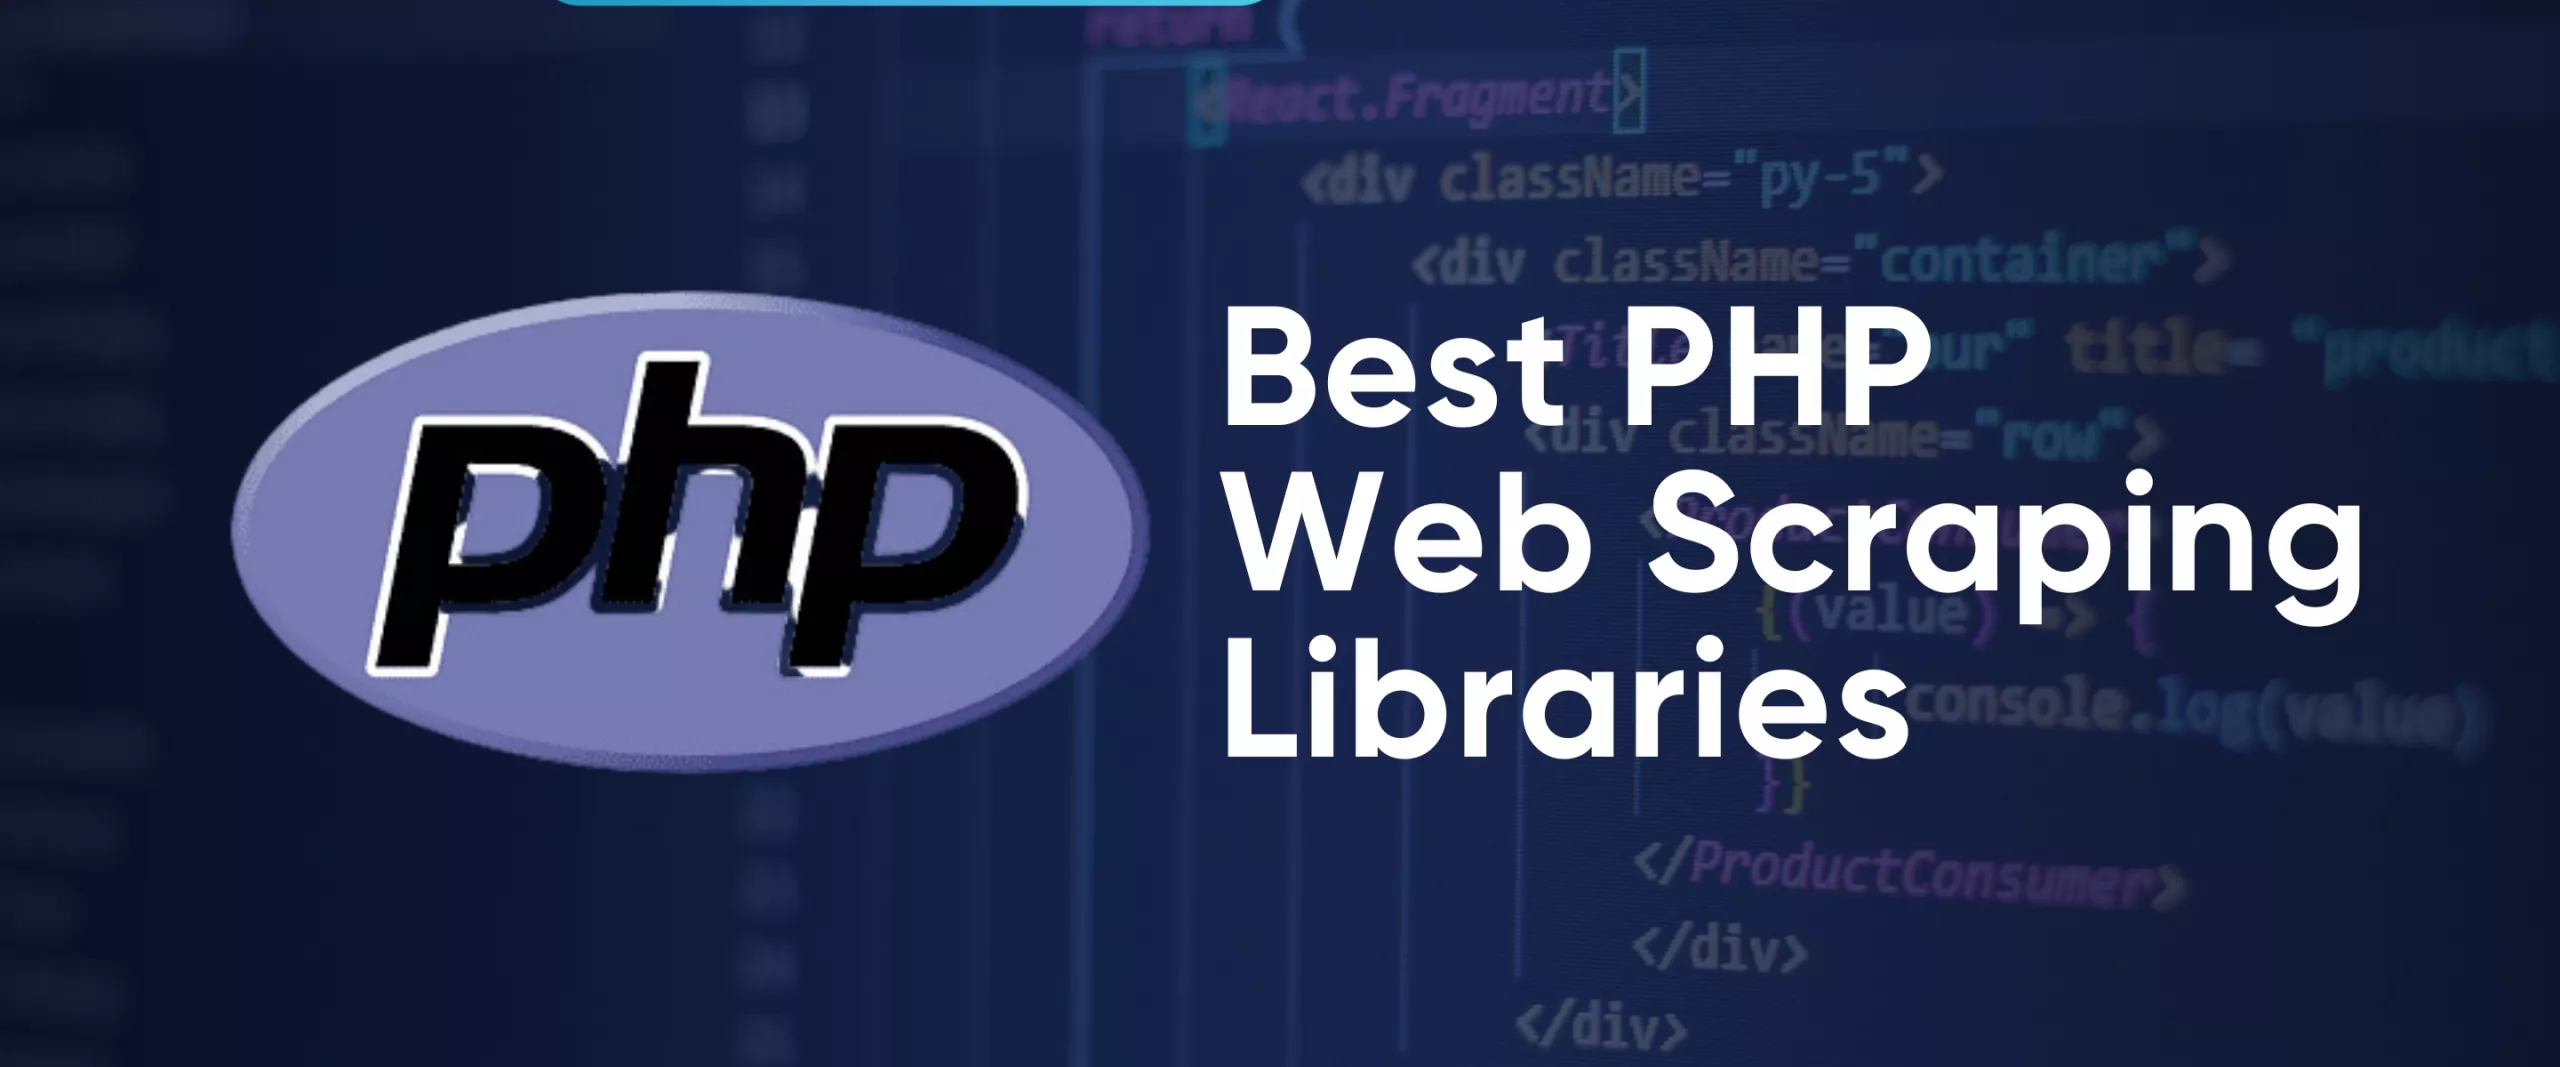 Best PHP Web Scraping Libraries